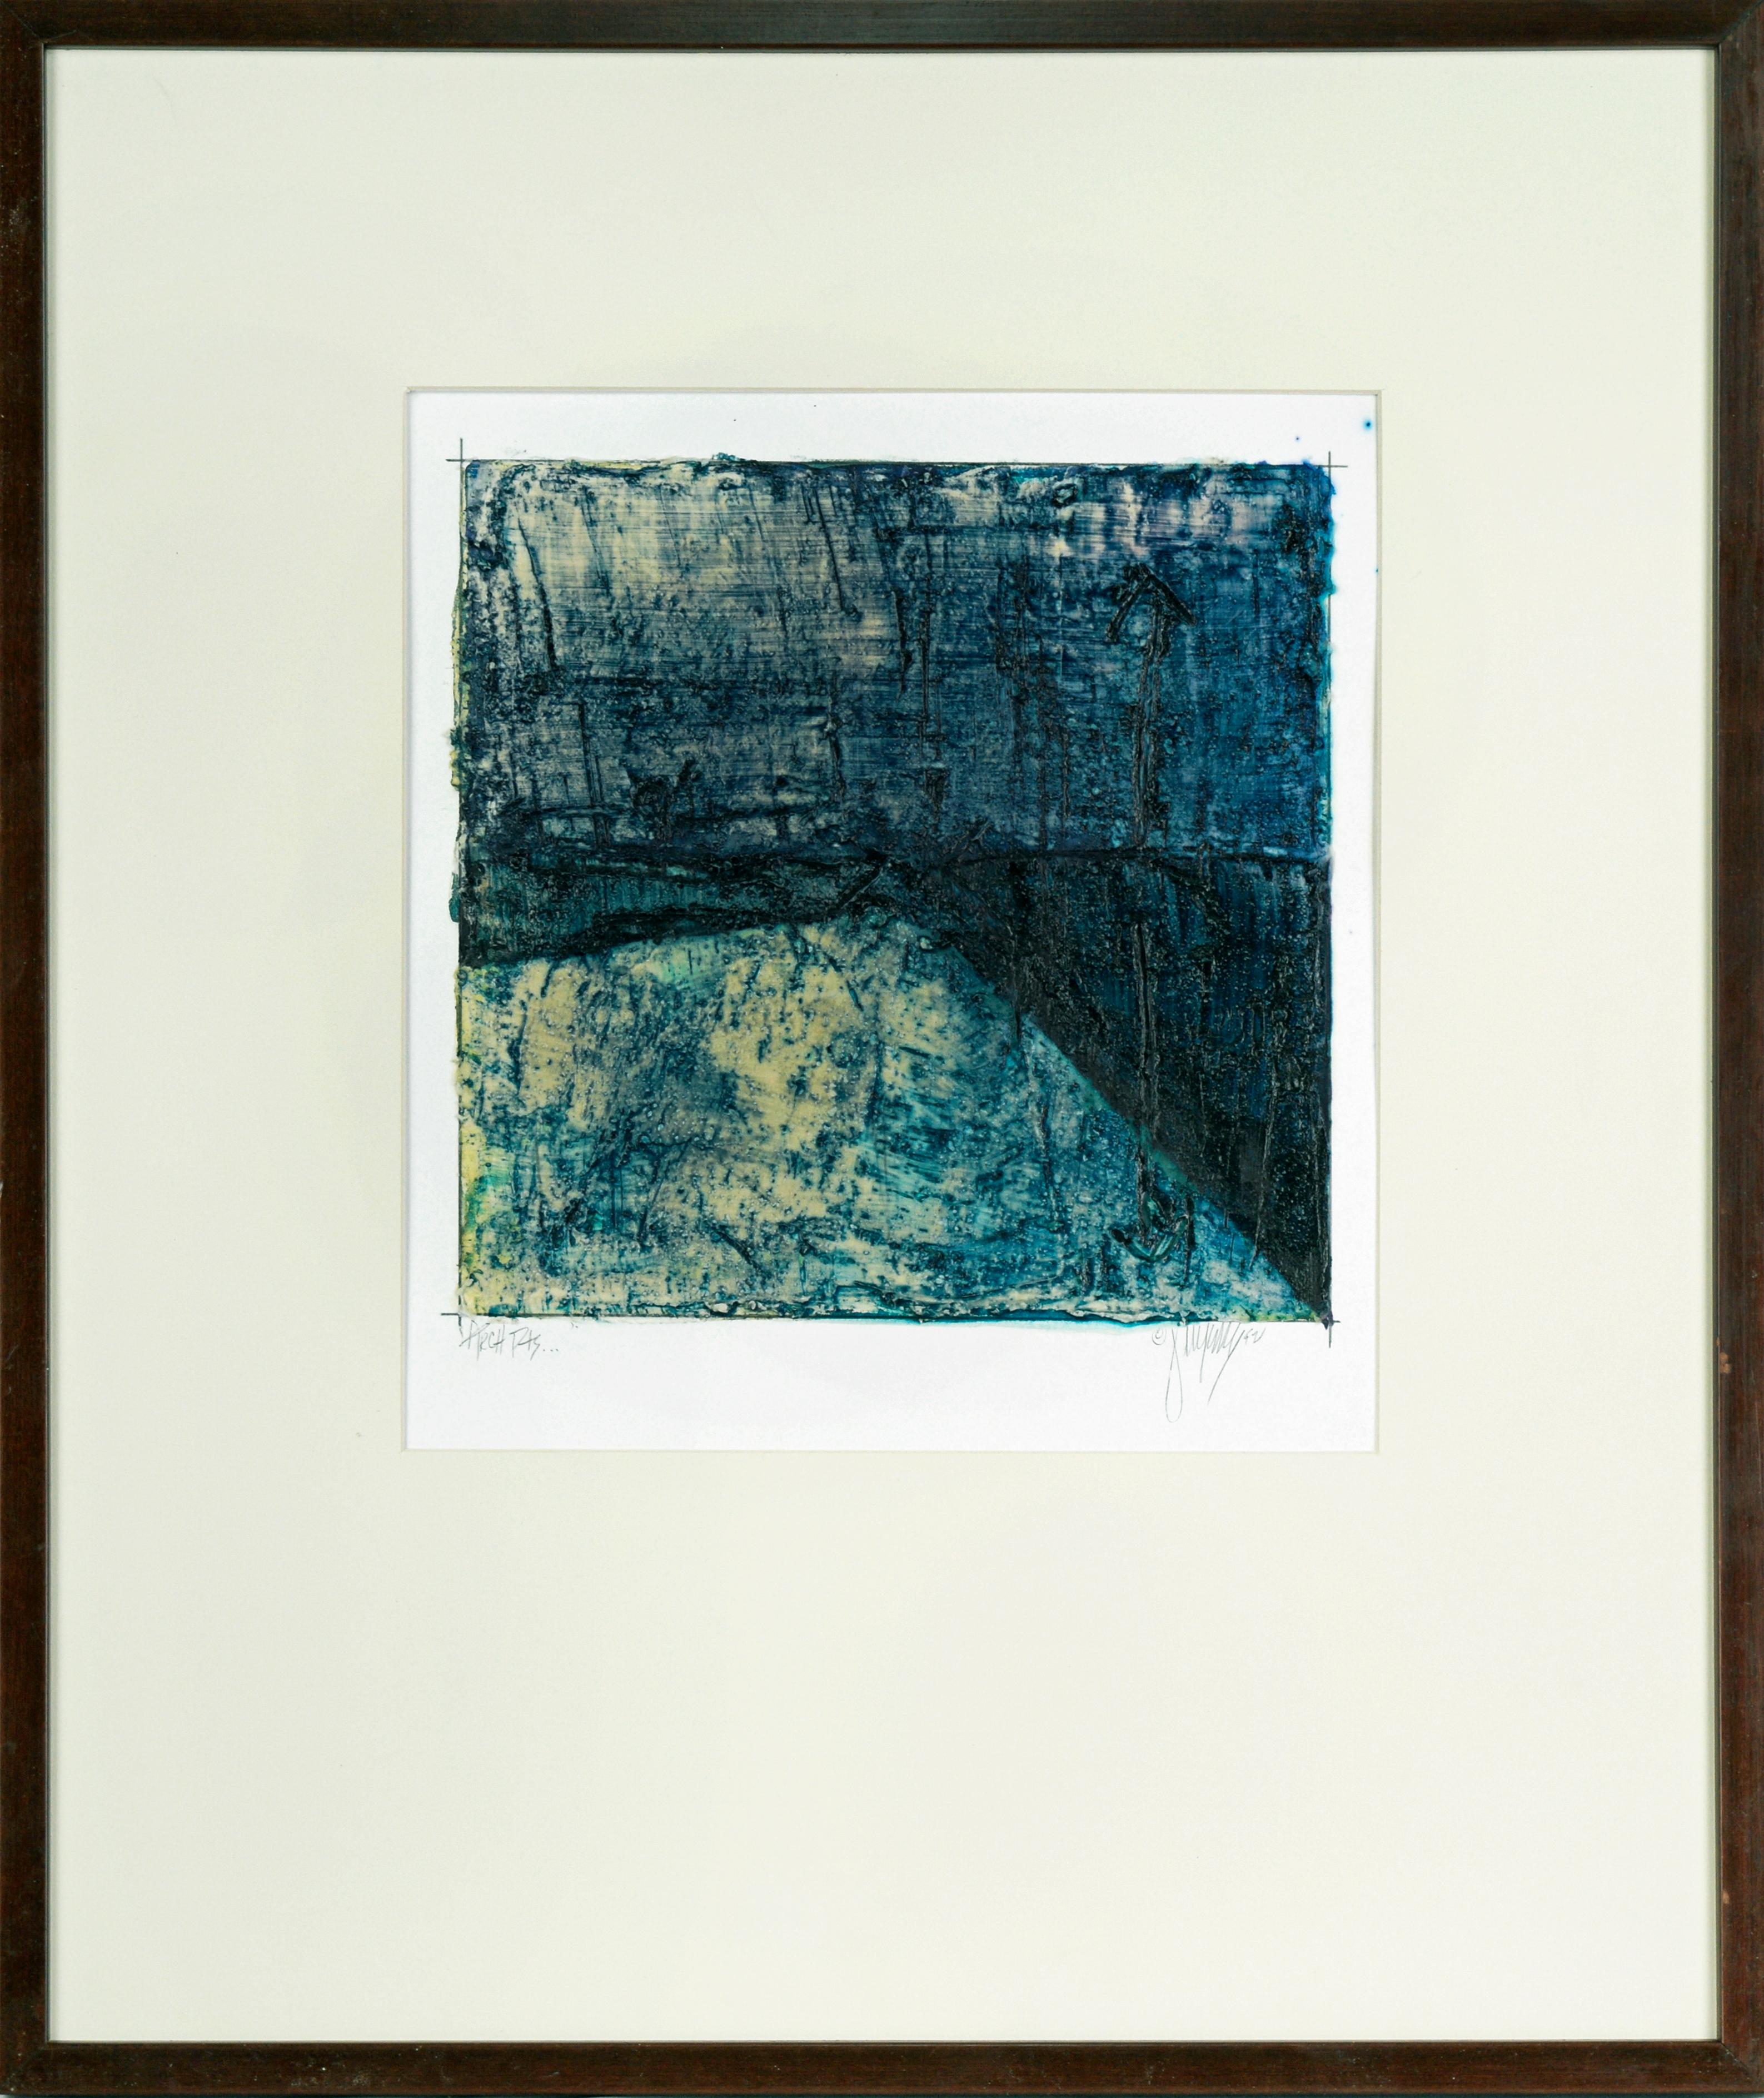 Unknown Abstract Painting - "Arch Points" - Abstract Expressionist Indigo Dye on Acrylic Resin Sculptural 